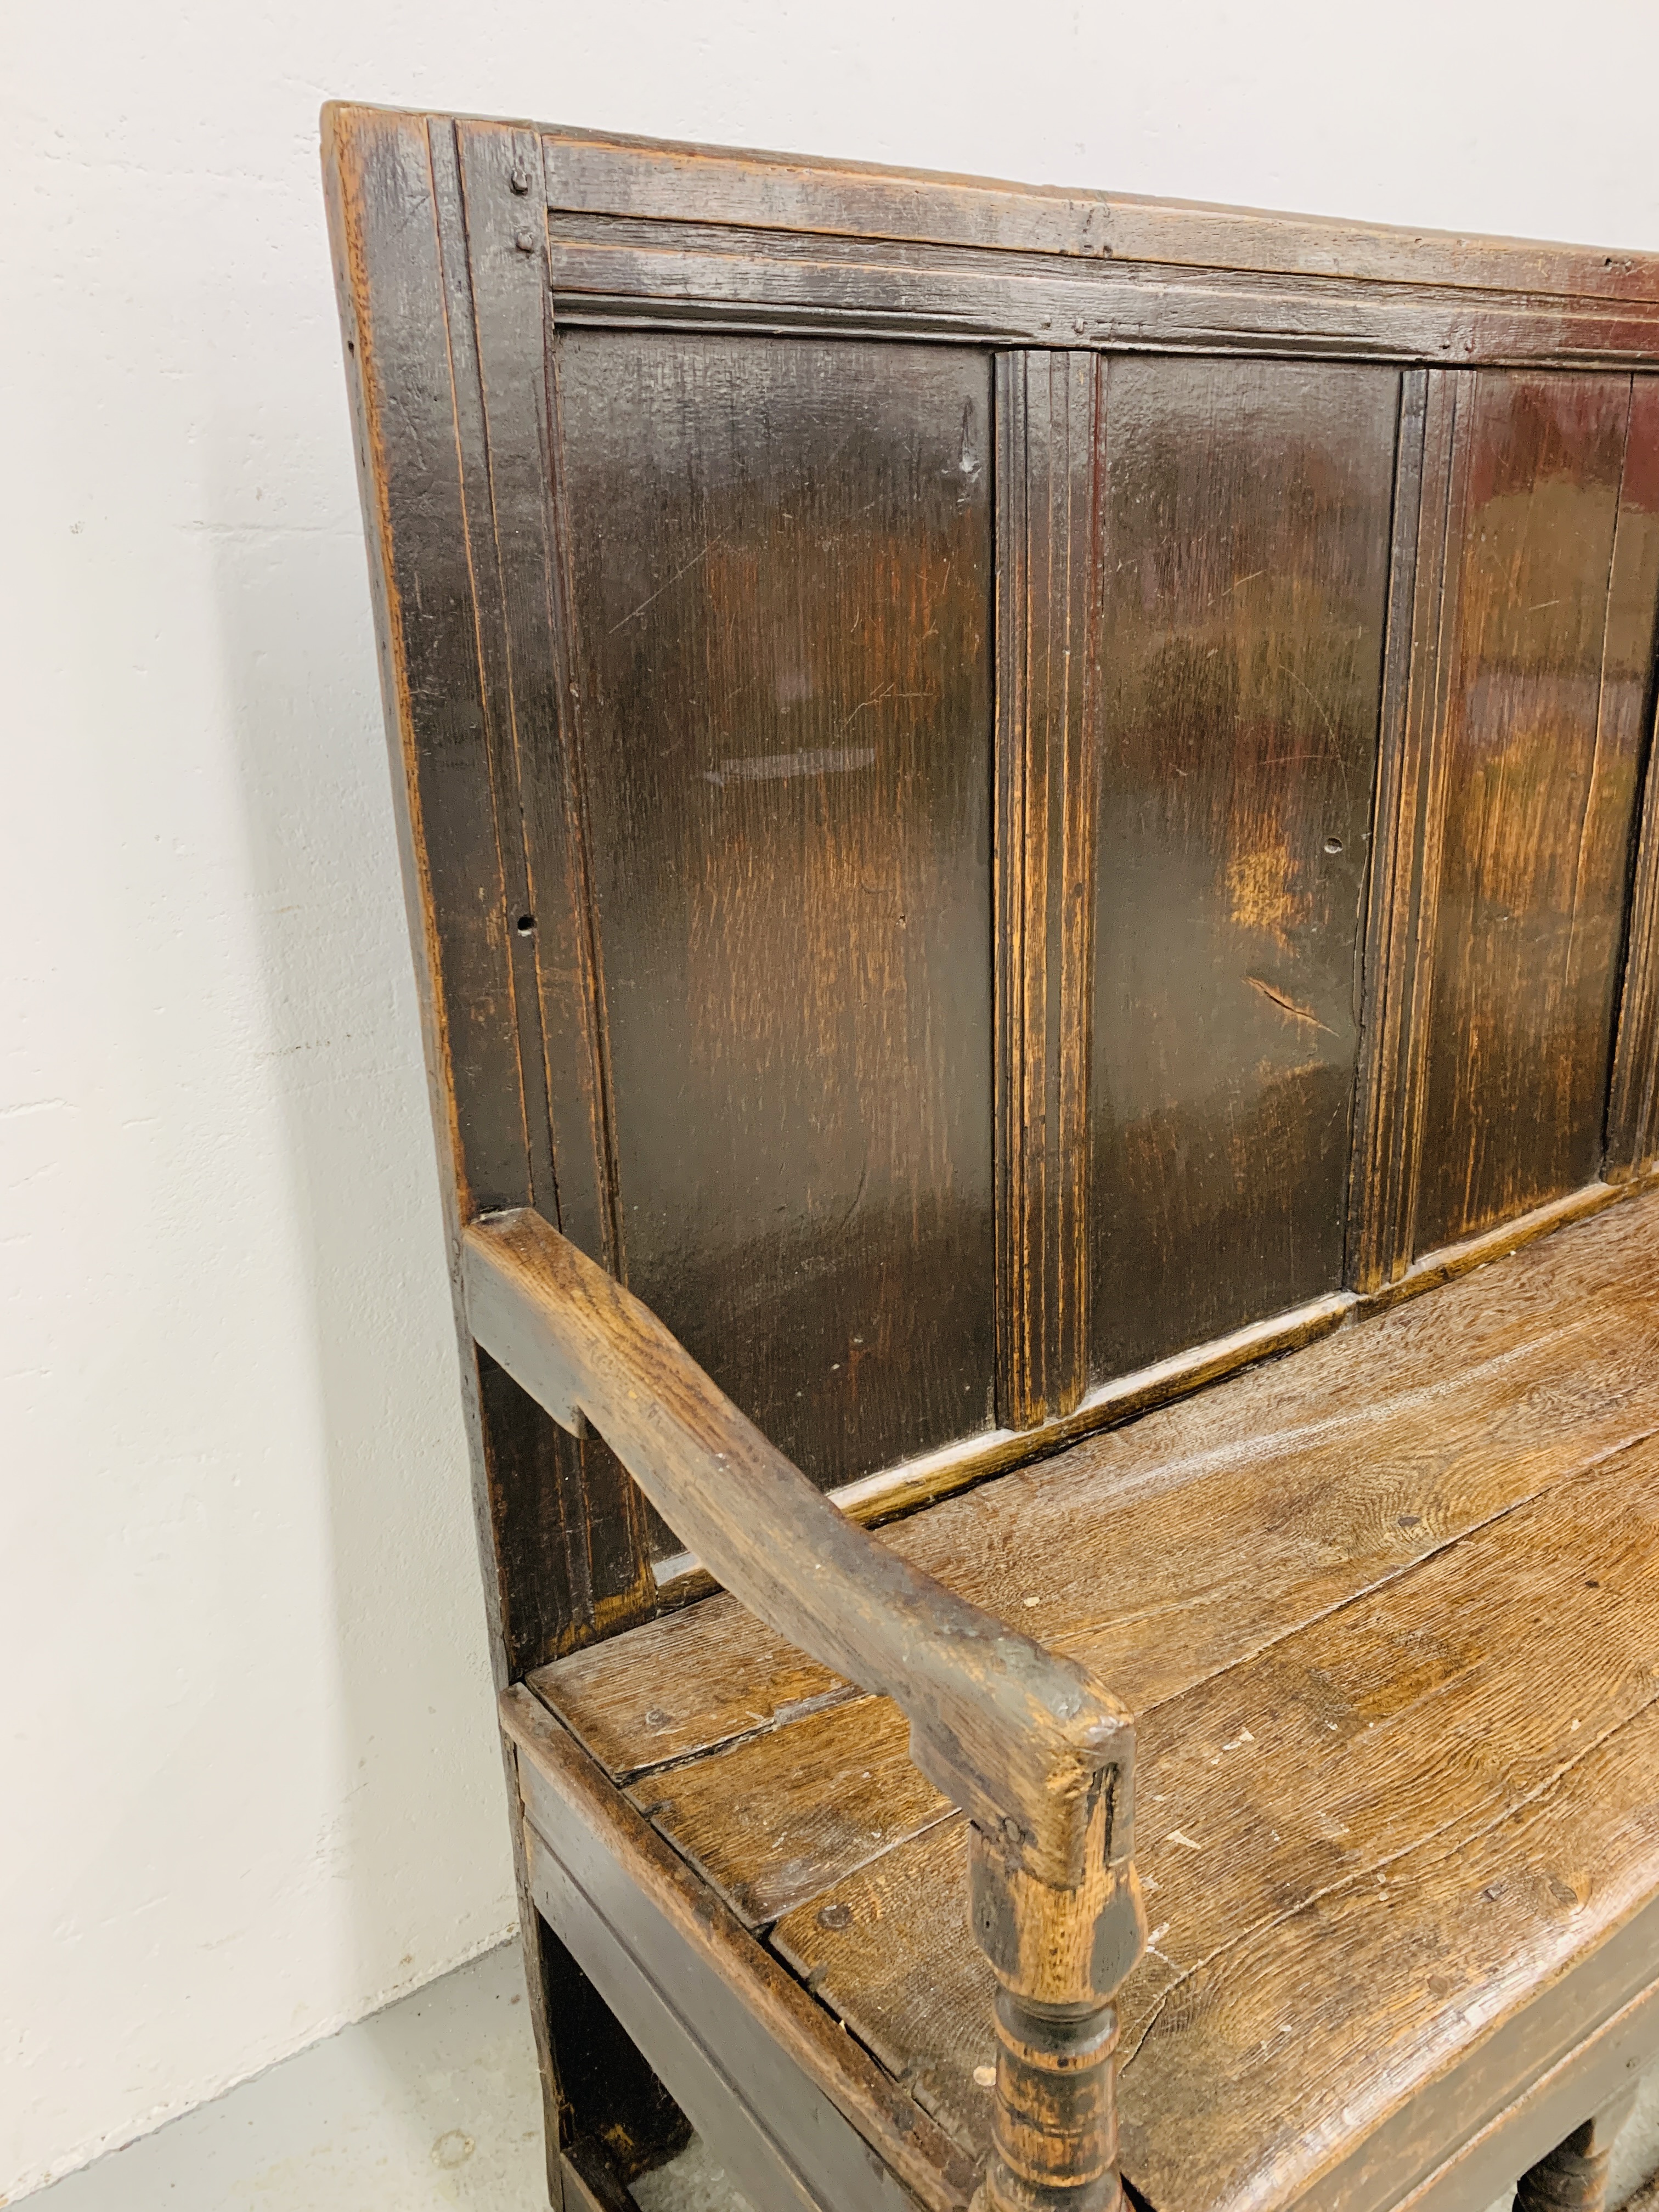 AN EARLY C18TH OAK SETTLE WITH FIVE PANELLED BACK ON BOBBIN TURNED SUPPORTS - W 197CM. D 50CM. - Image 9 of 22